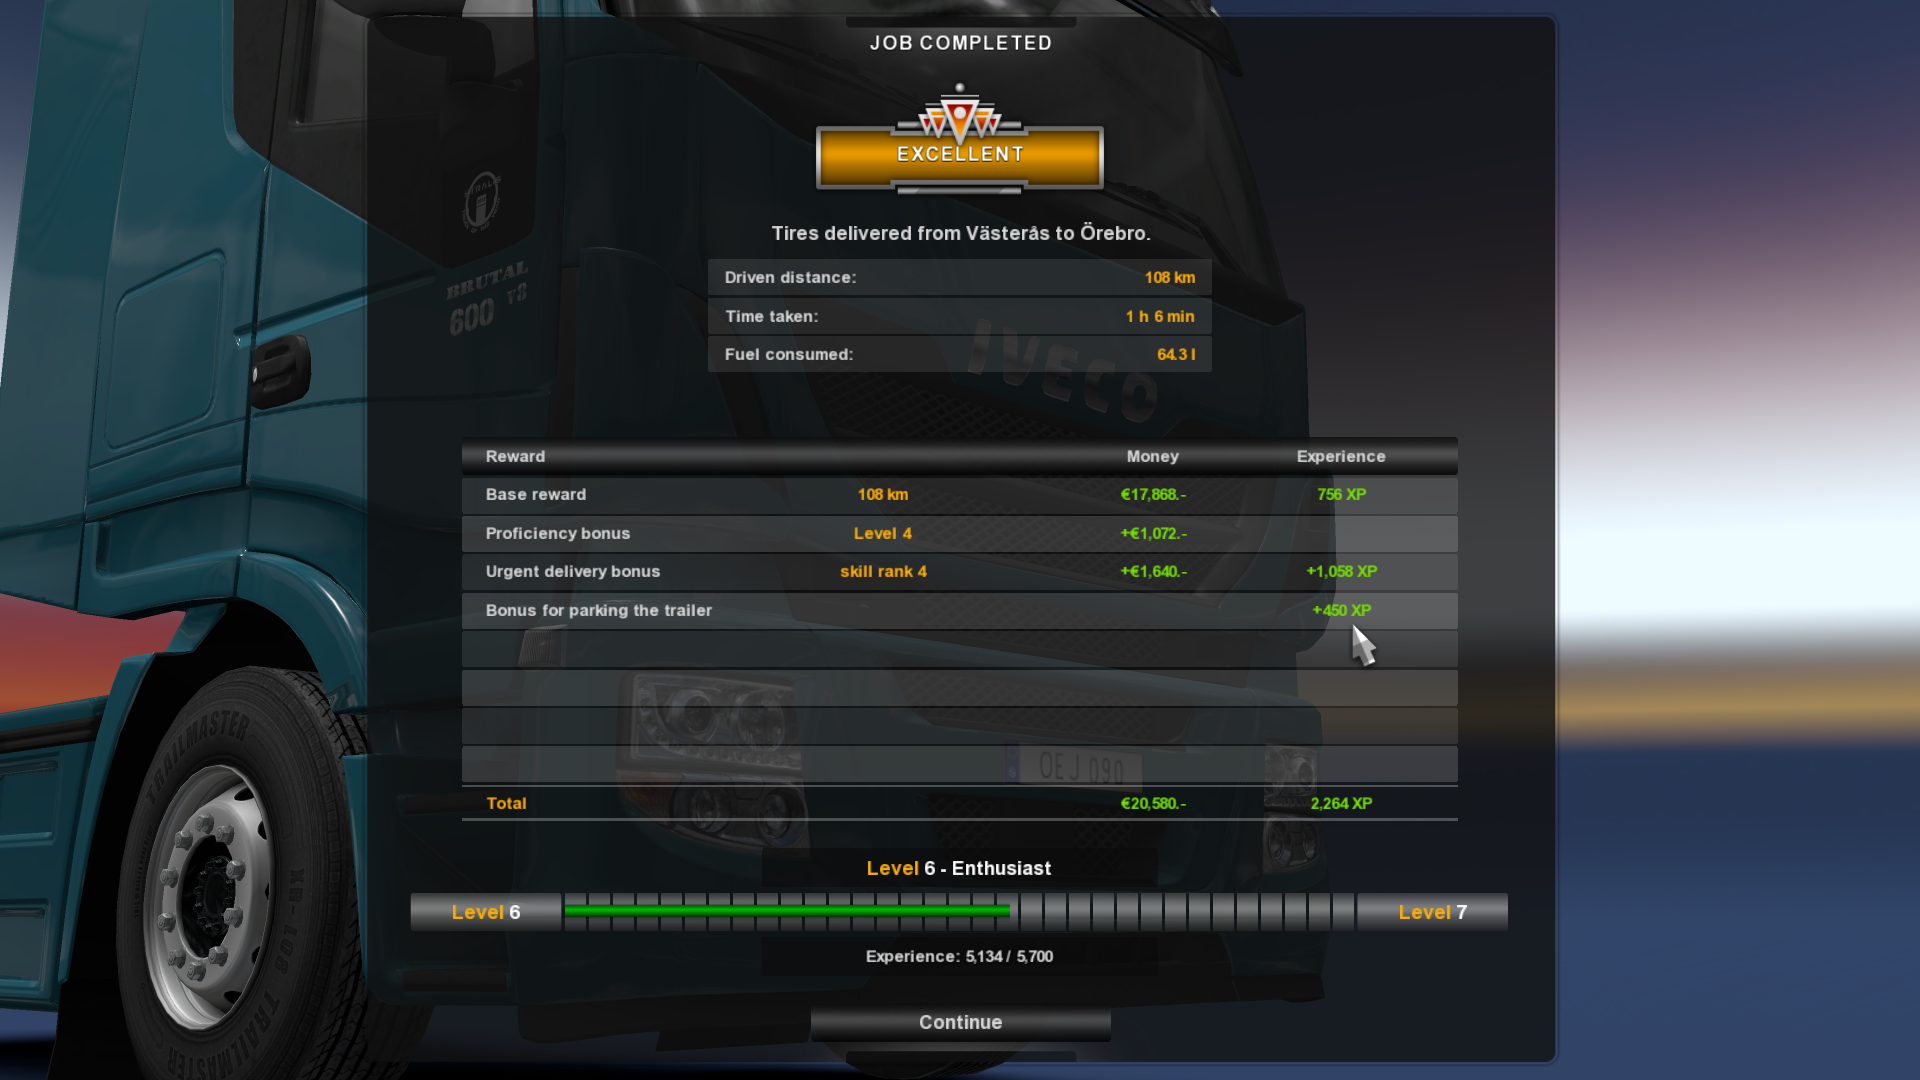 EXP x7 and money x7 / more experience ETS2 mods Euro truck